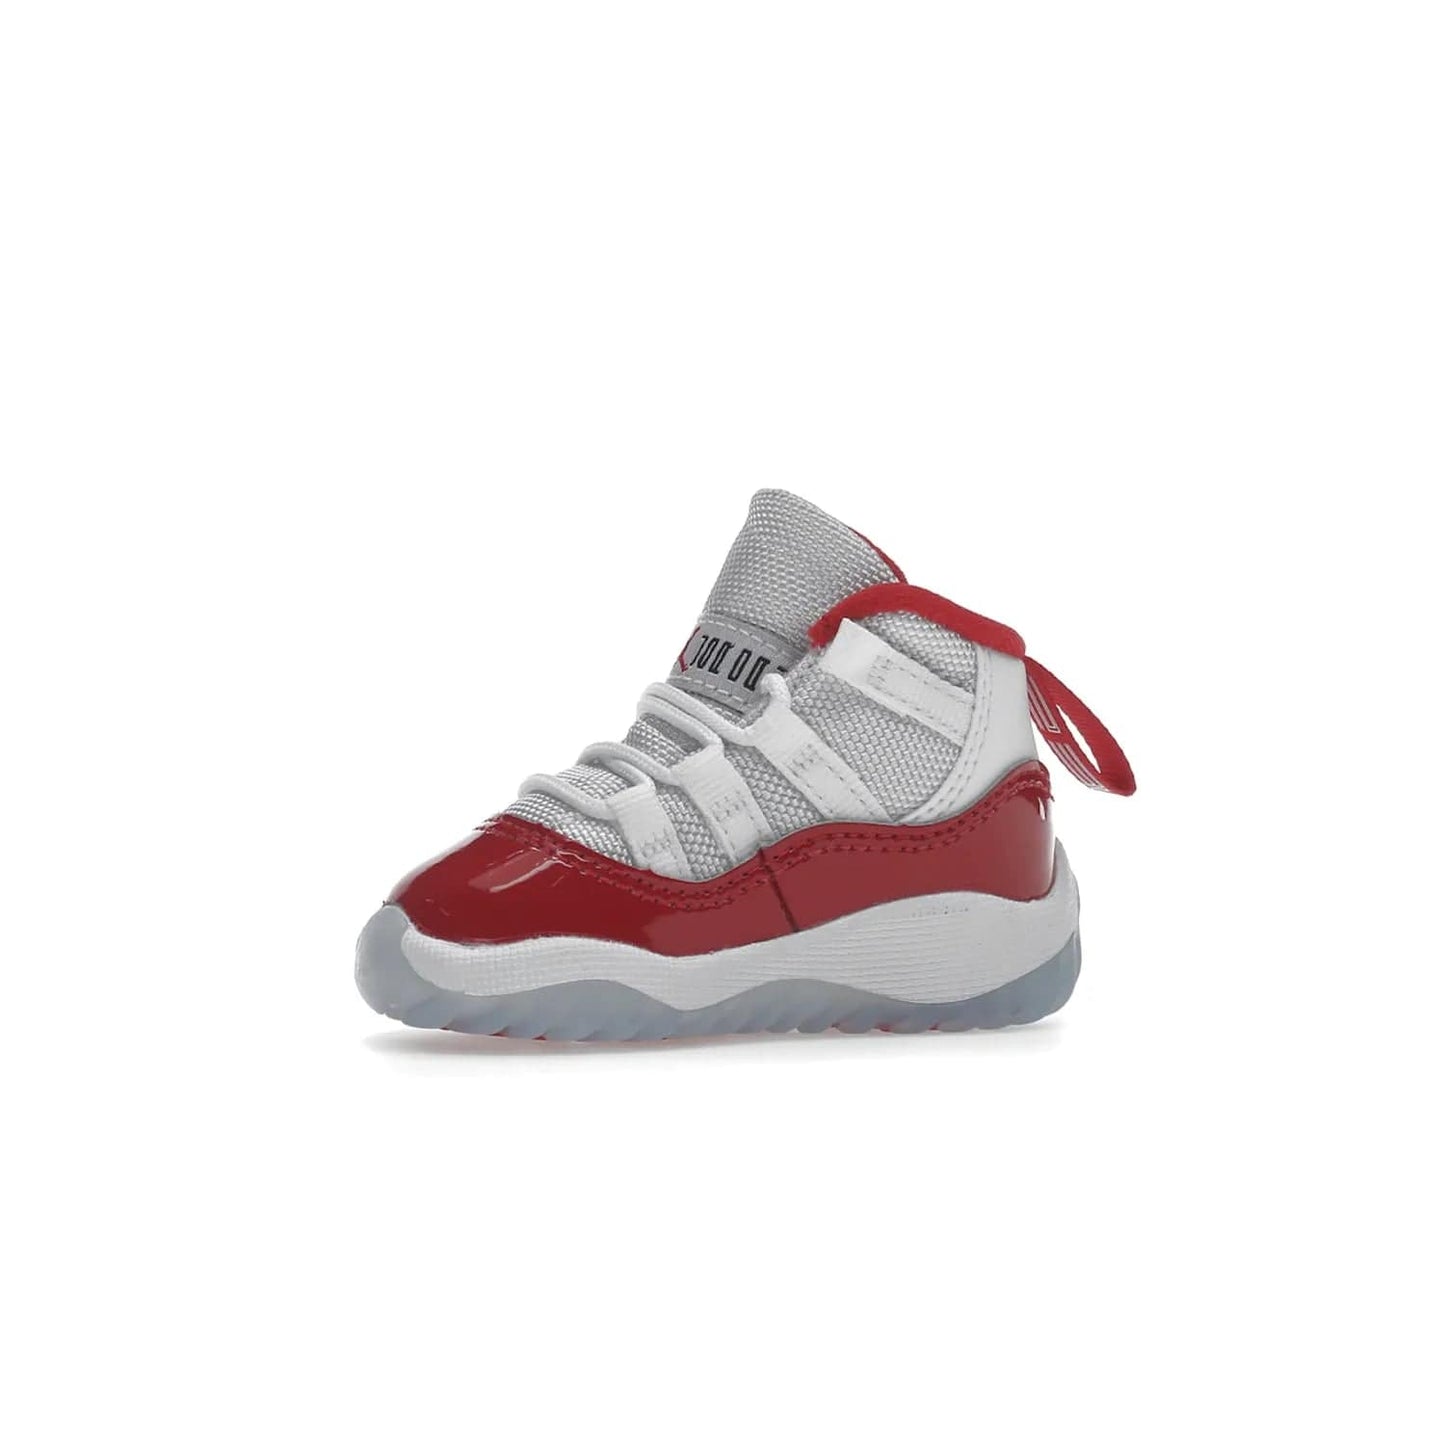 Jordan 11 Retro Cherry (2022) (TD) - Image 17 - Only at www.BallersClubKickz.com - Timeless classic. Air Jordan 11 Retro Cherry 2022 TD combines mesh, leather & suede for a unique look. White upper with varsity red suede. Jumpman logo on collar & tongue. Available Dec 10th, priced at $80.